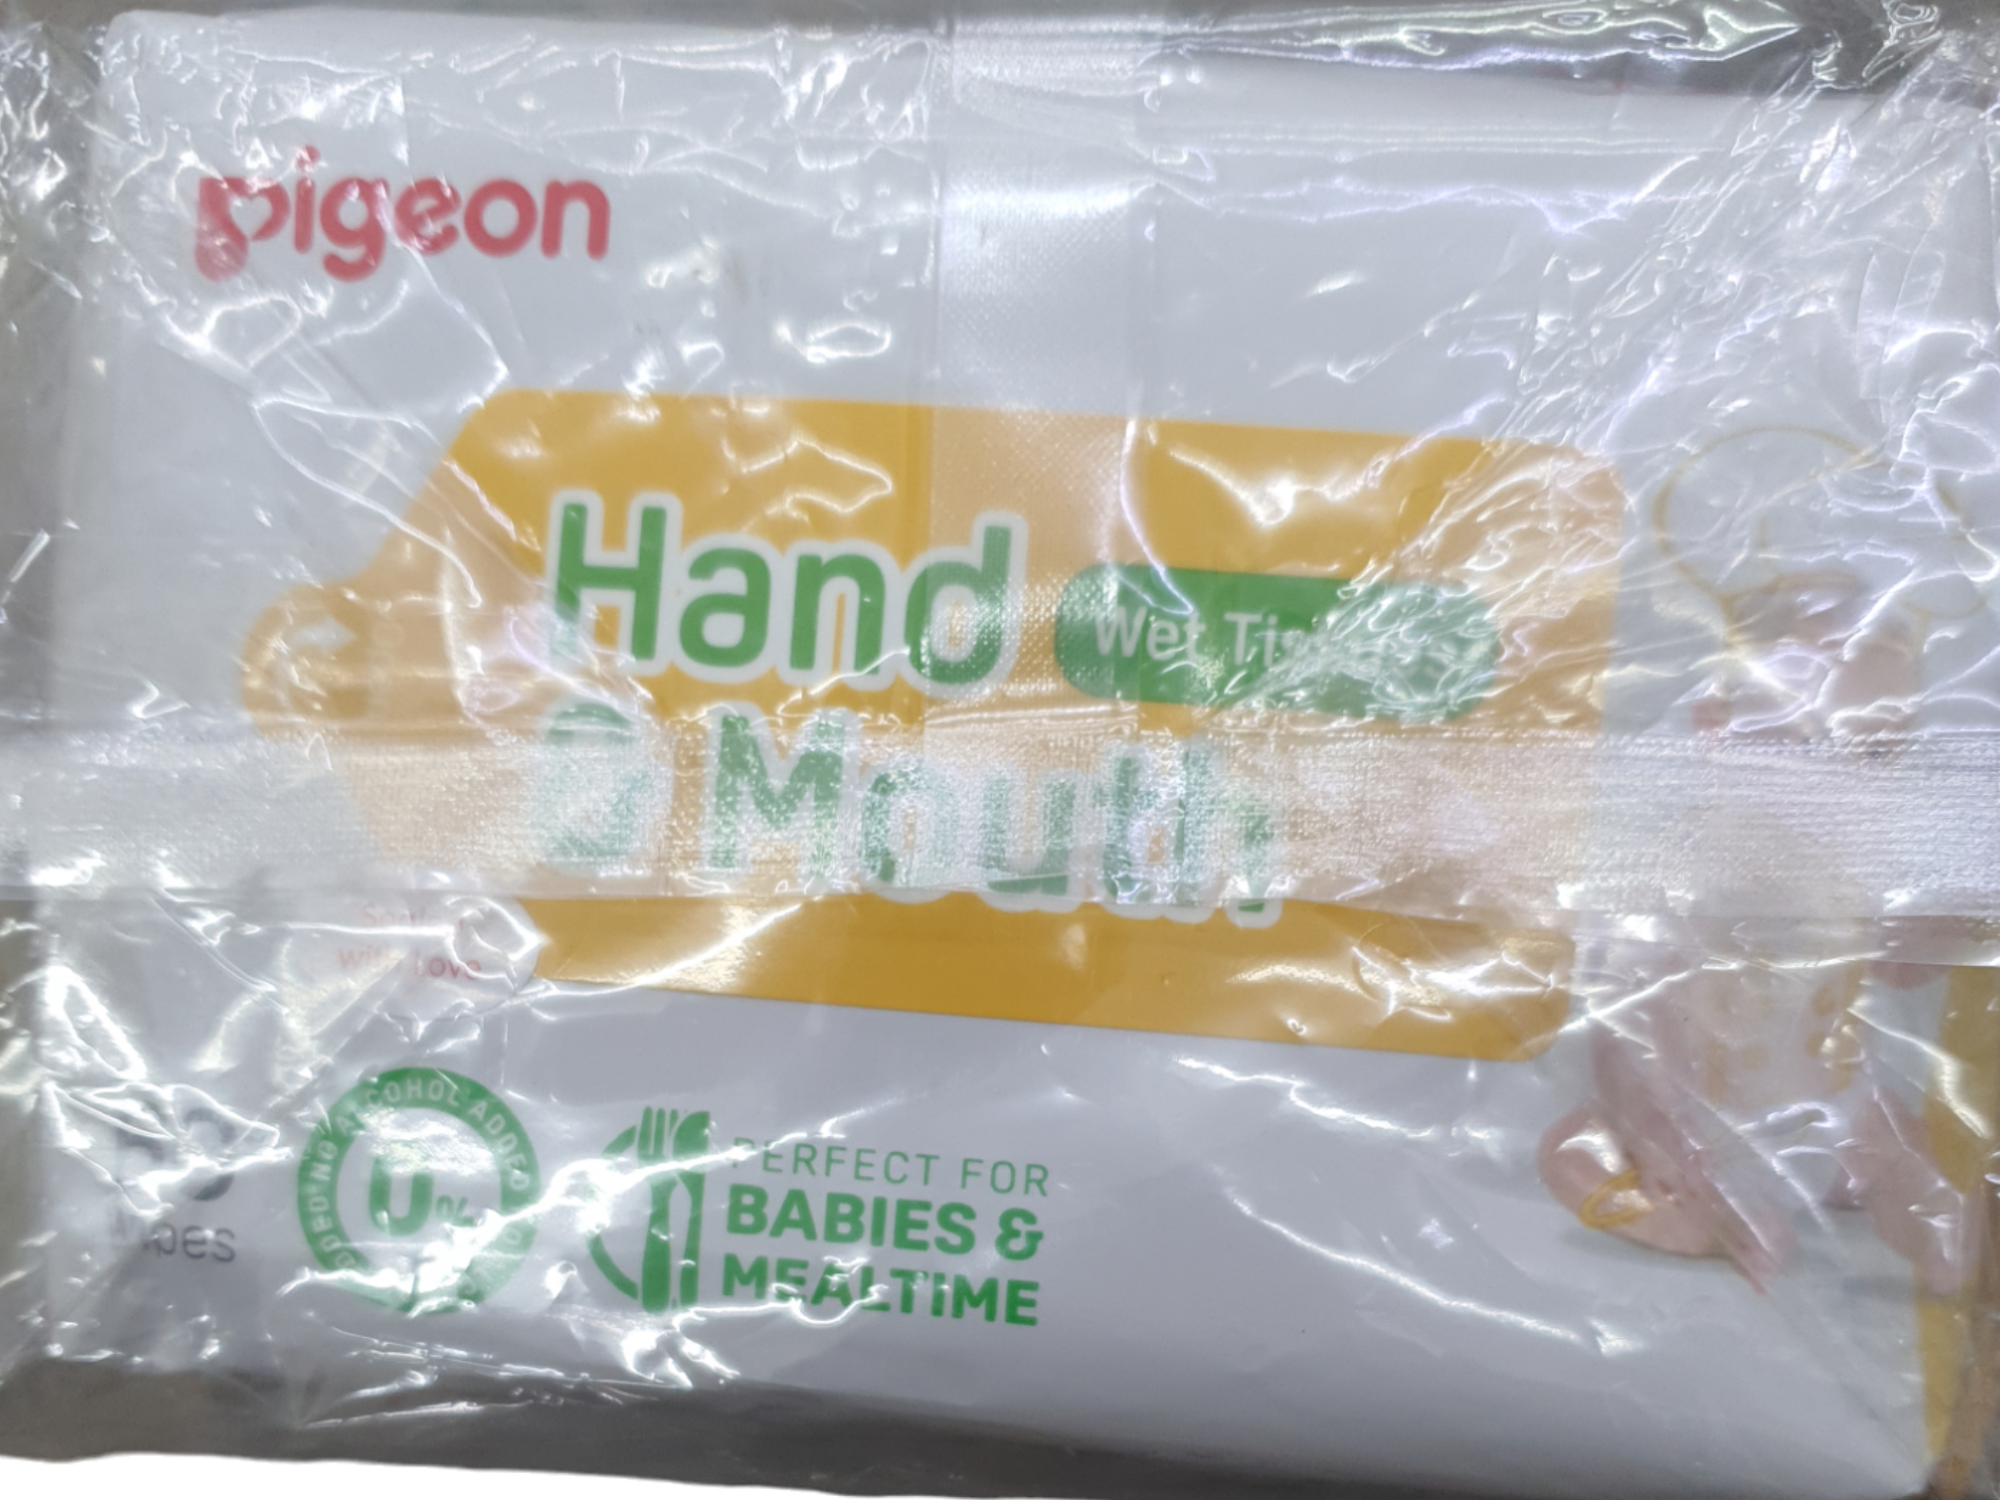 PIGEON HAND & MOUTH WET TISSUES 60 X 2